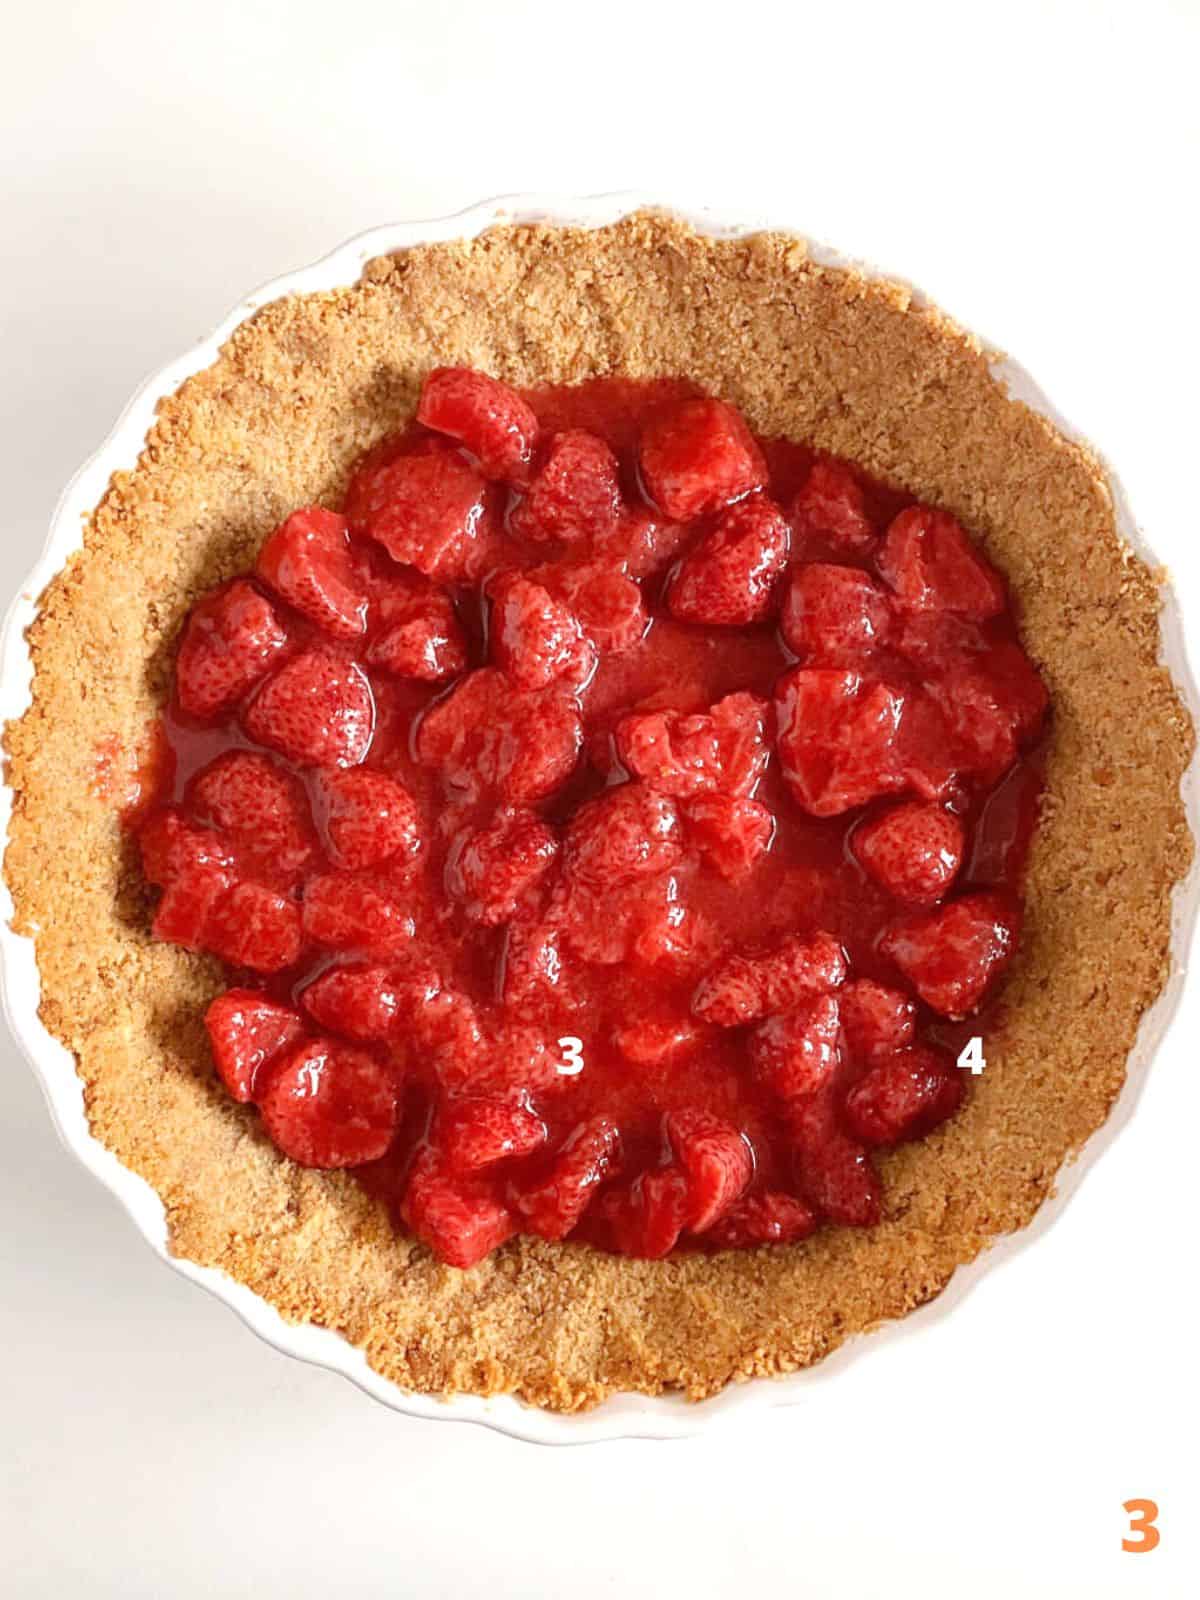 Top view of strawberry pie filling in a graham cracker crust, white surface.